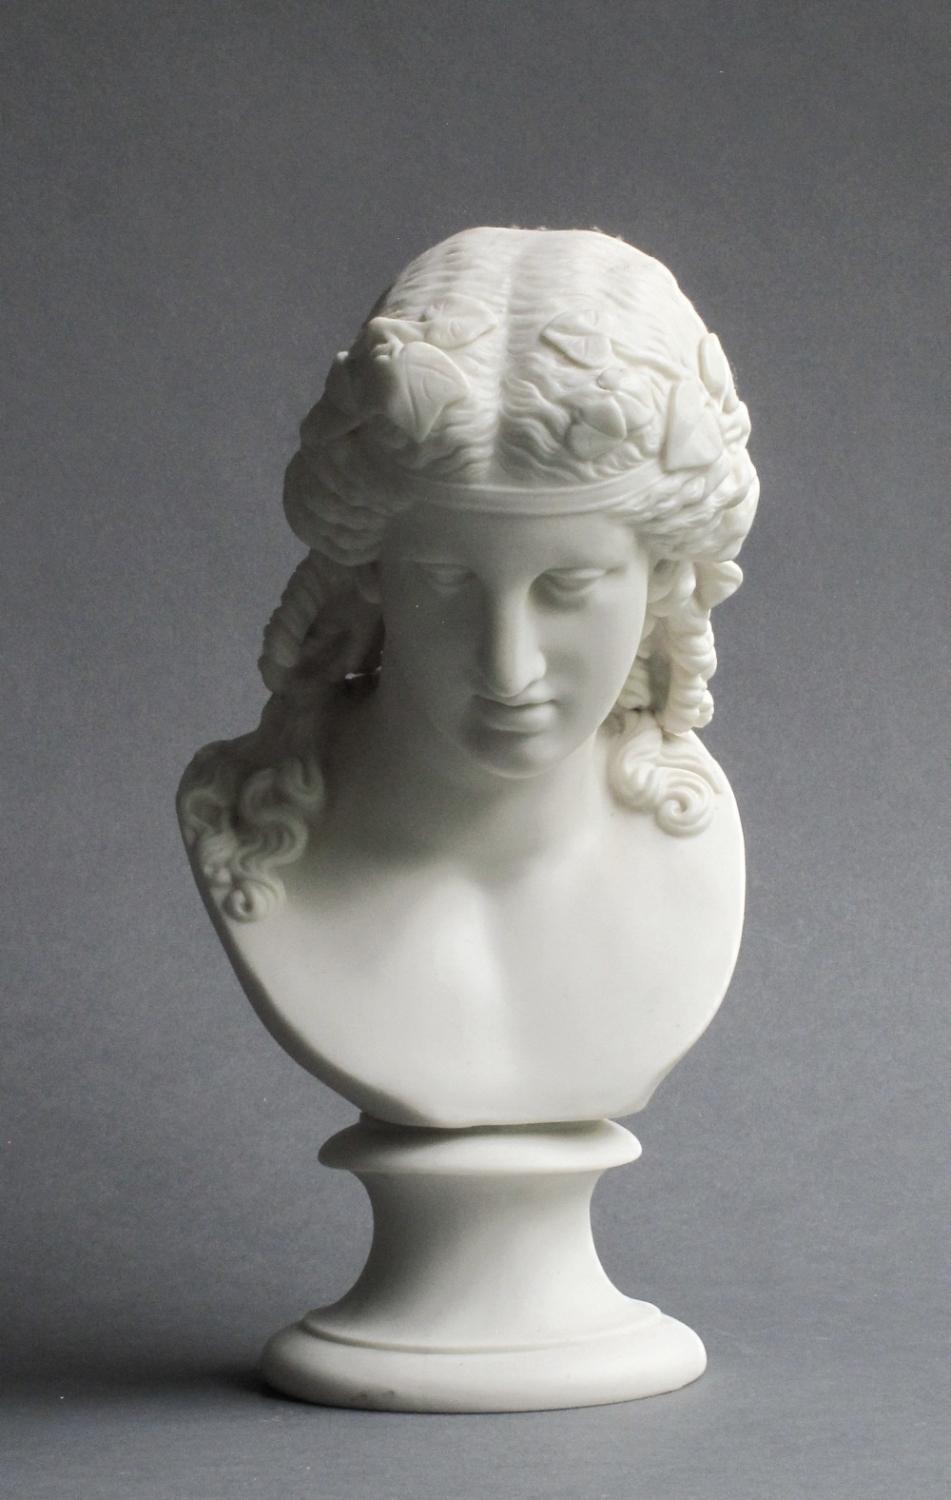 Parian bust of Ariadne, possibly by Minton